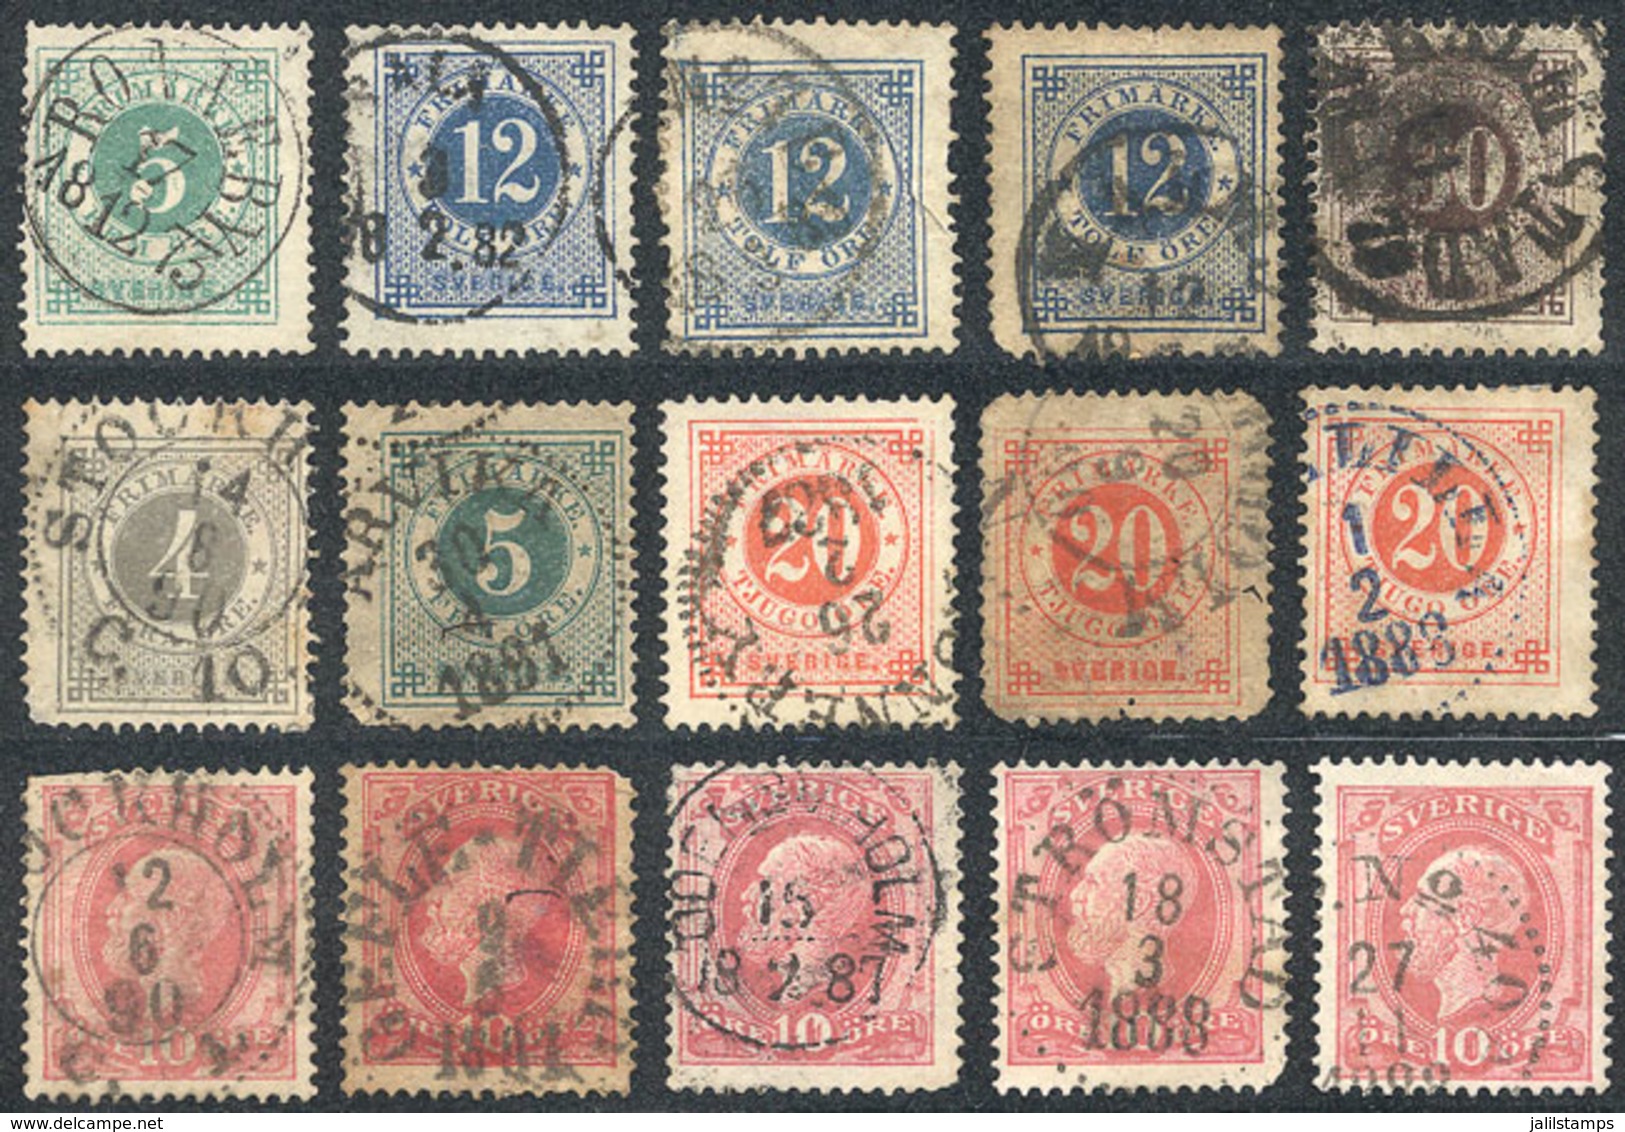 SWEDEN: Lot Of Used Stamps, With Good Values And Interesting Cancels, Fine To VF General Quality, Good Opportunity! - Collections